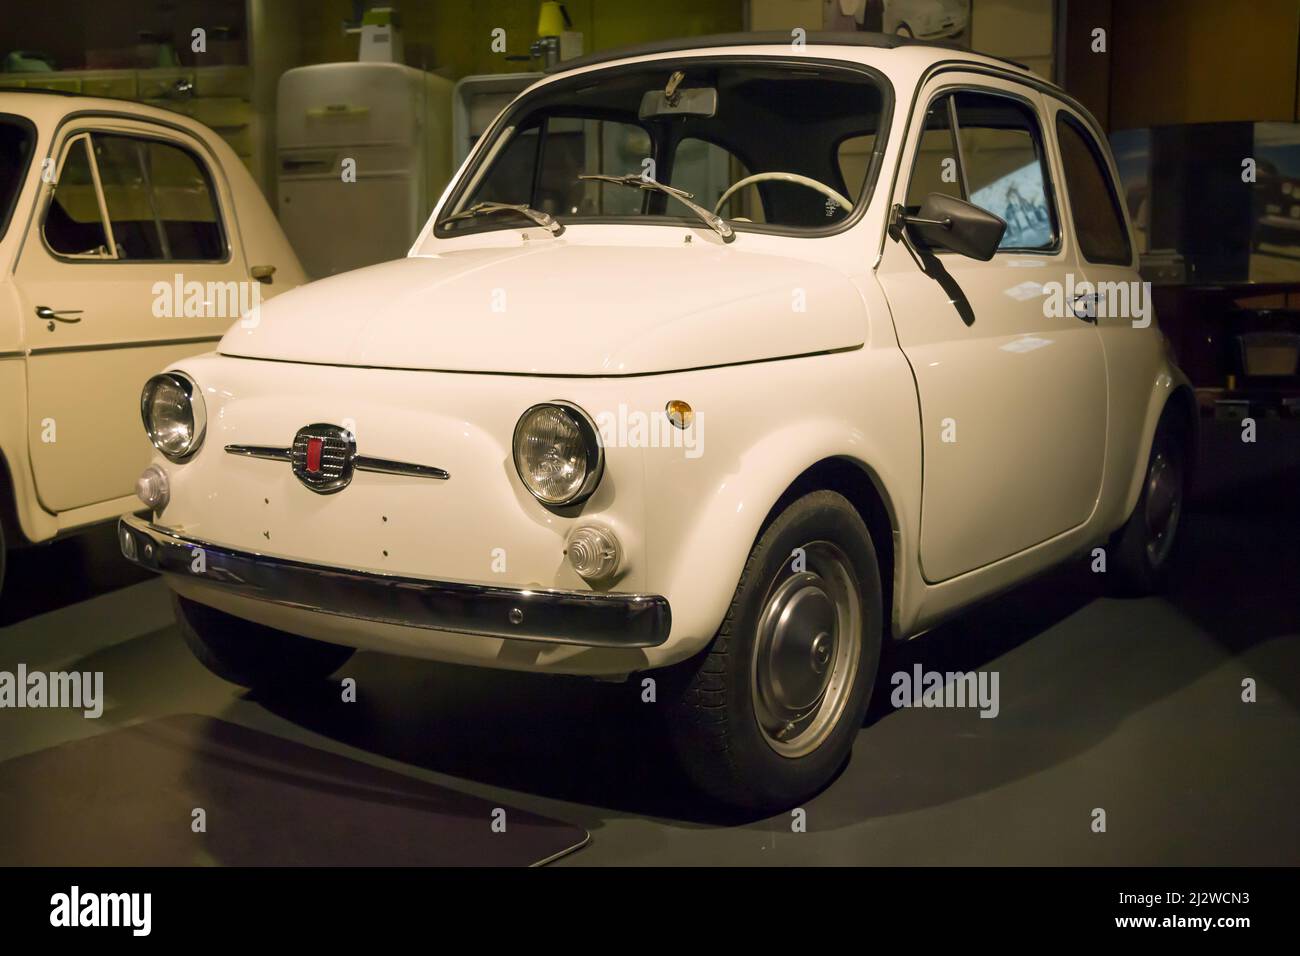 Torino, Italy - August 14, 2021: 1968 Fiat 500 F showcased at the National Automobile Museum (MAUTO) in Torino, Italy. Stock Photo